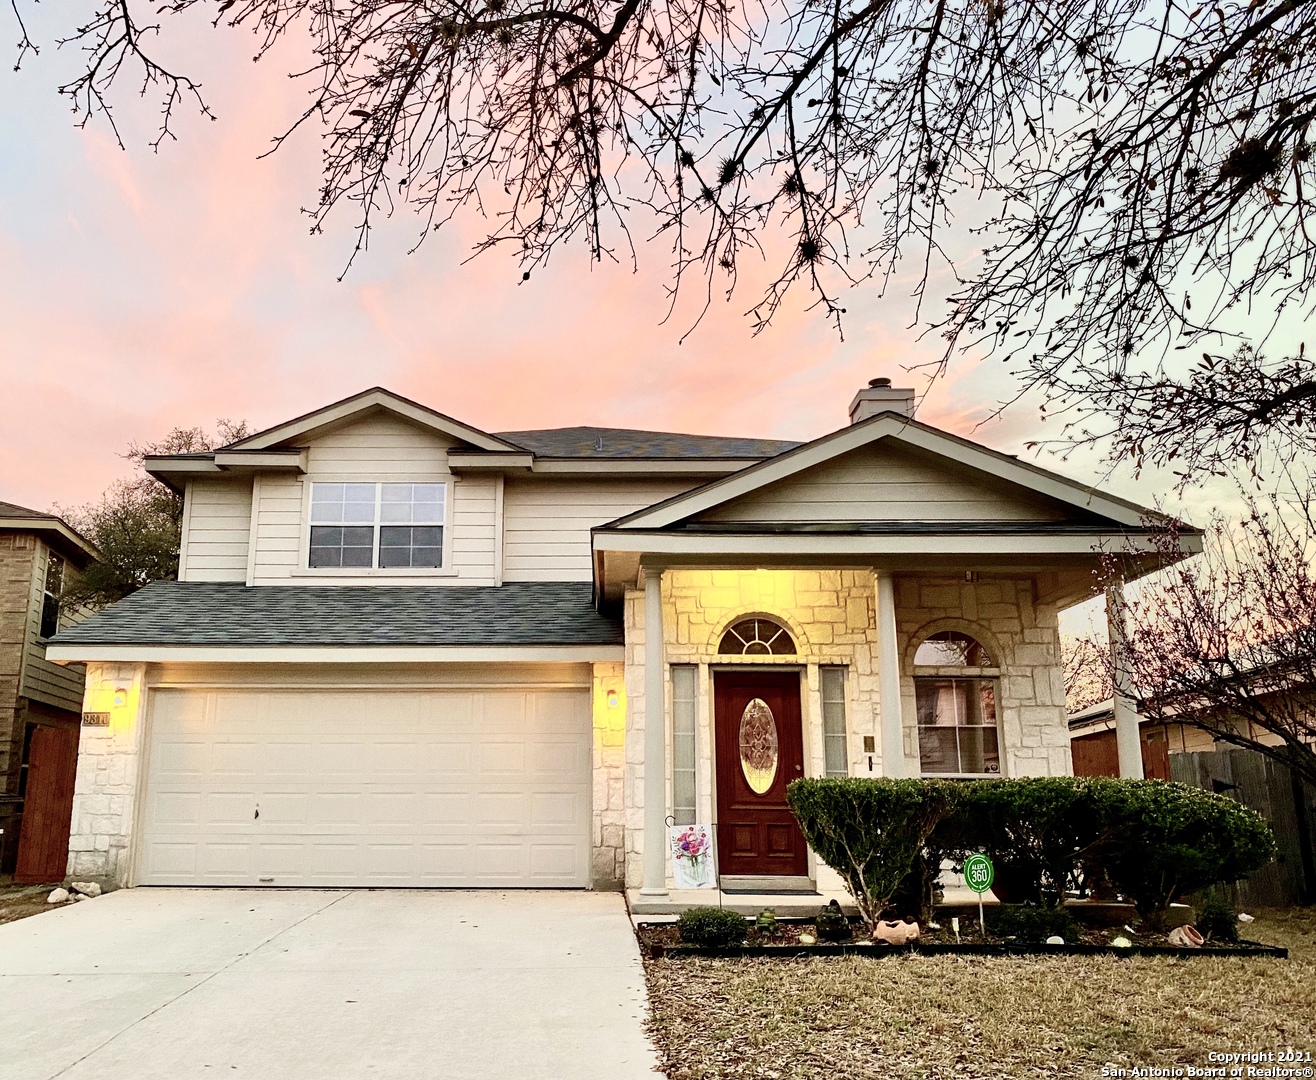 **MOTIVATED SELLER **  Nestled in a peaceful cul de sac in the very desirable Northwest area of San Antonio, this pristinely kept home is ready for a new family.  The original owner has maintained the home with great pride.  Featuring a double master suite, this home is perfect for a family of ANY size.  With plenty of beautiful windows for natural light and elegant fixtures throughout the home, this home boasts casual elegance.  The bedrooms are very spacious and the walk-in closets are custom oversized.  You will be AMAZED!!  The upstairs Family room is cozy and peaceful.  It features a fireplace for the family to gather around on cold, winter nights.  The back yard is an oasis of tranquility with a beautiful covered patio to enjoy outdoor meals with your loved ones.    Conveniently located near shopping centers, restaurants, highly rated NISD schools, and entertainment, this GEM OF A HOME is a must-see to fully appreciate!!